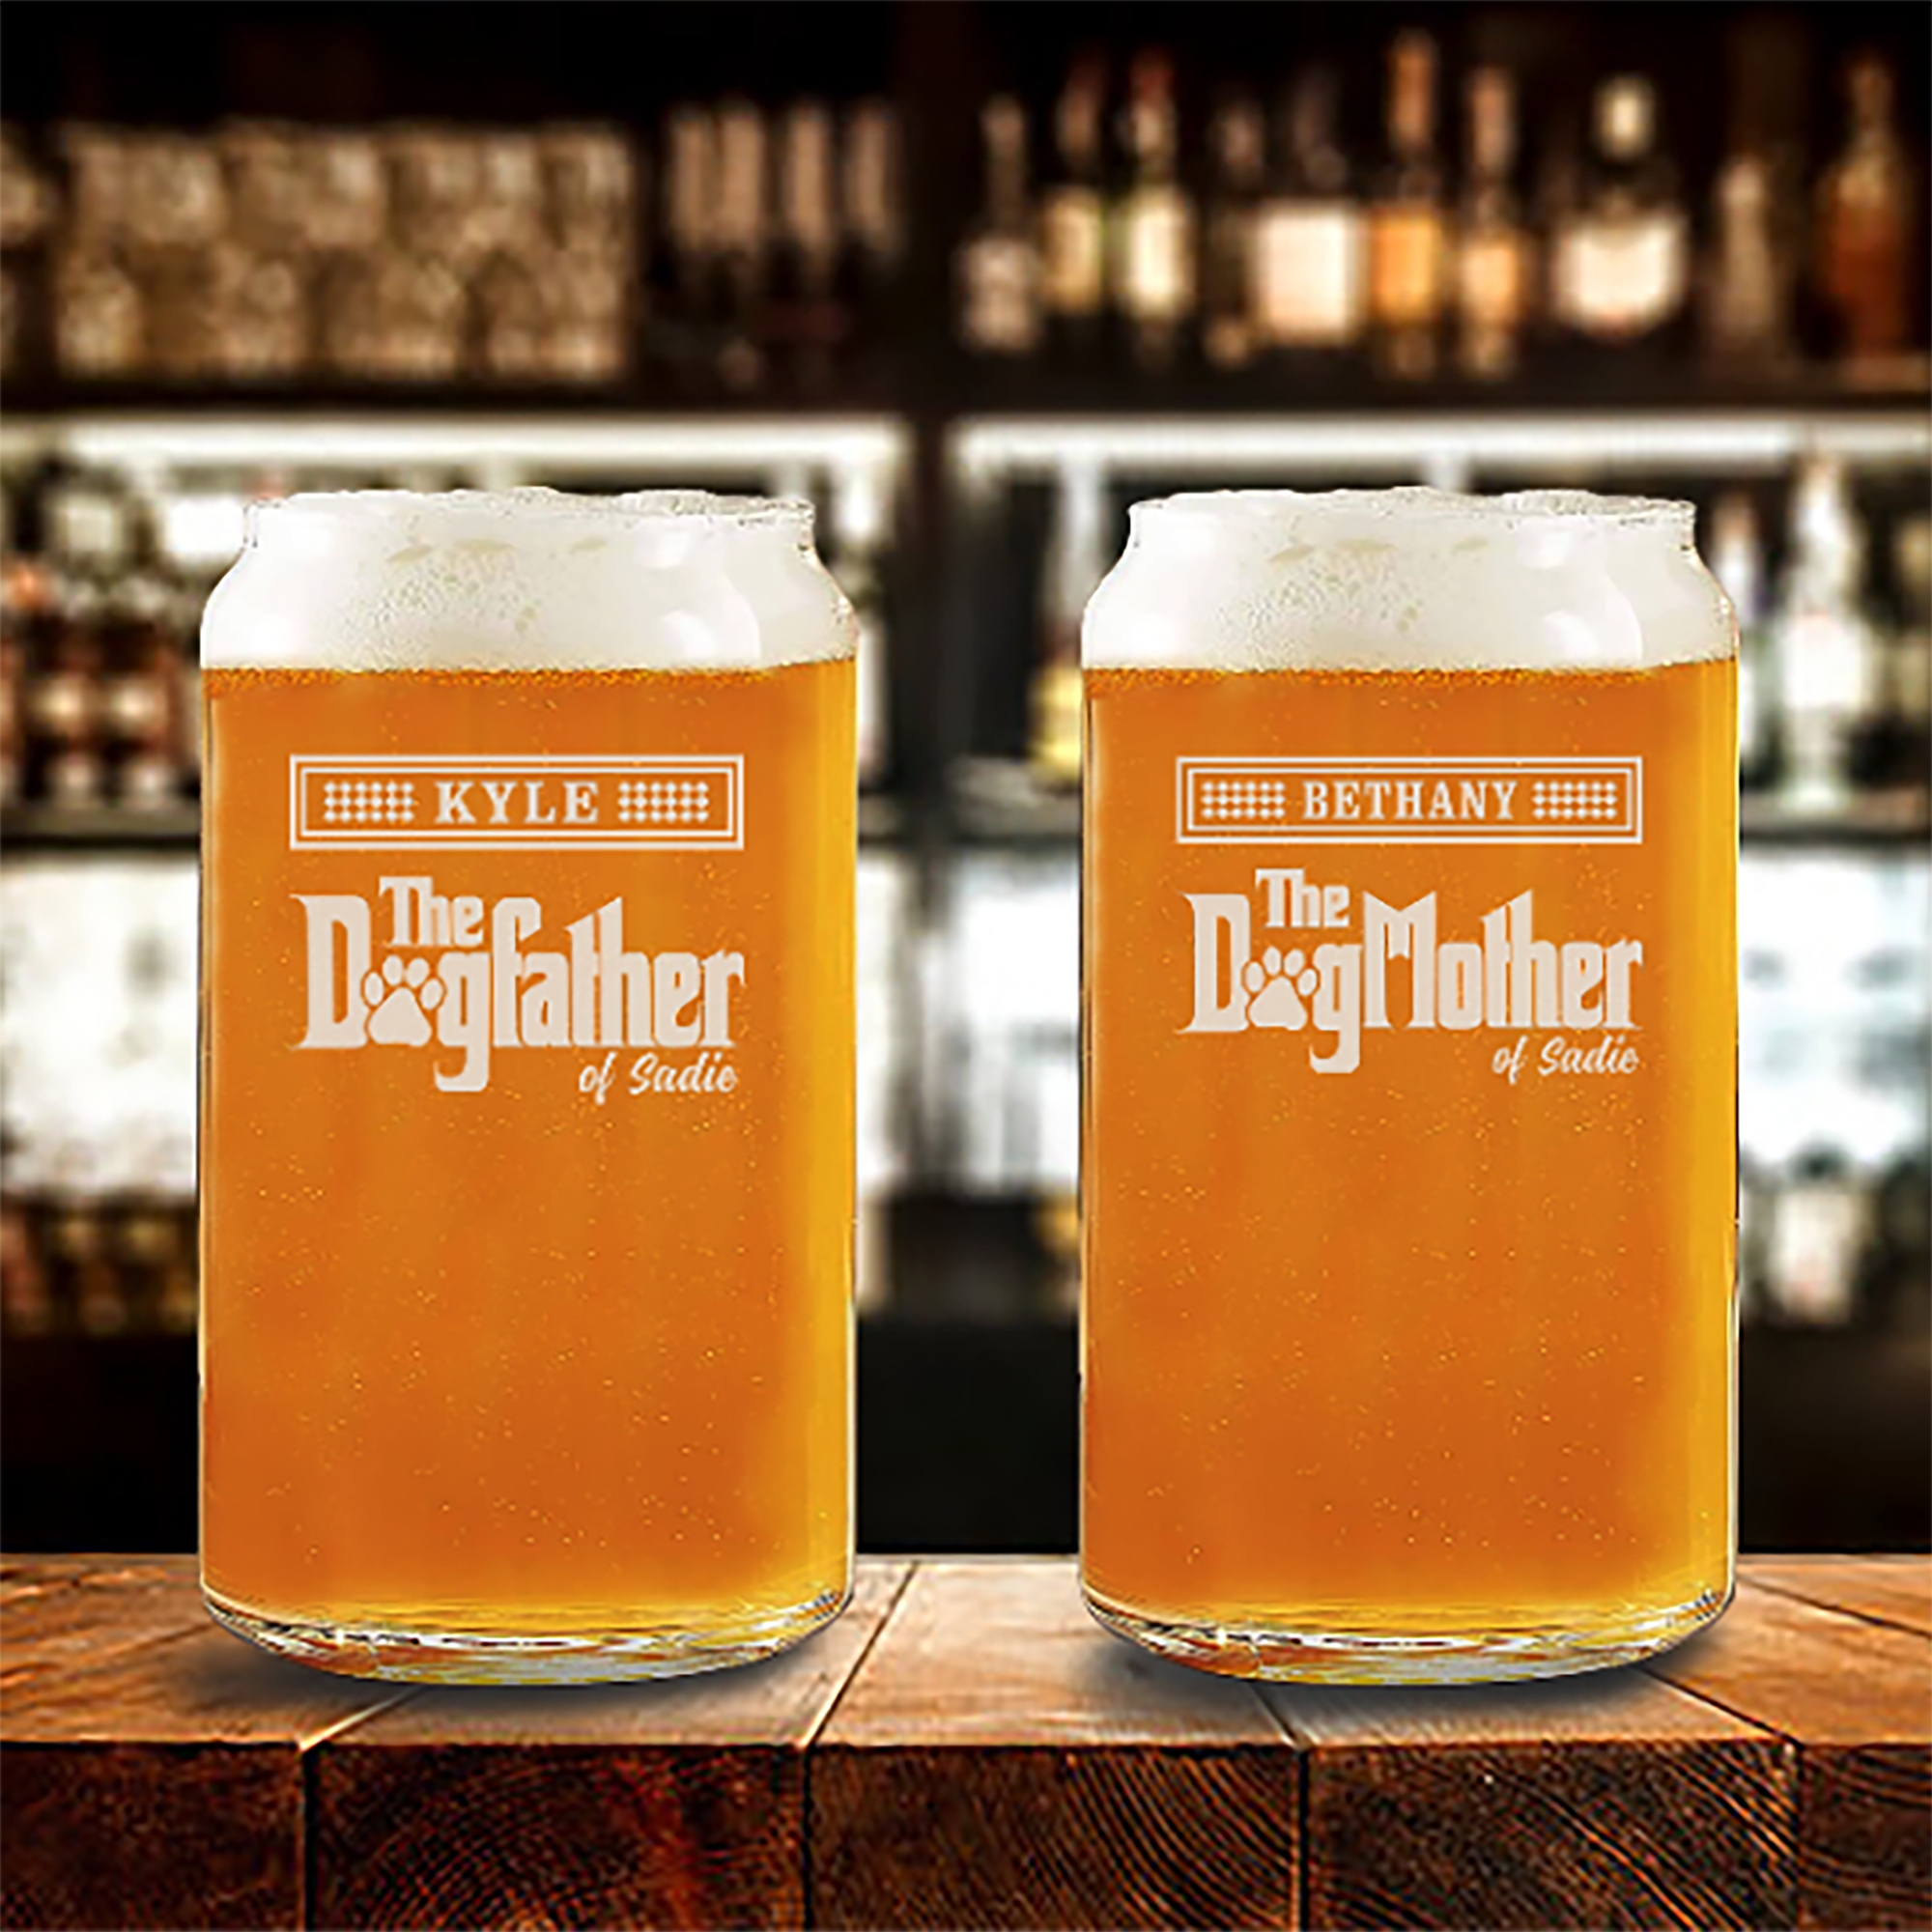 Dog Father Beer Glass